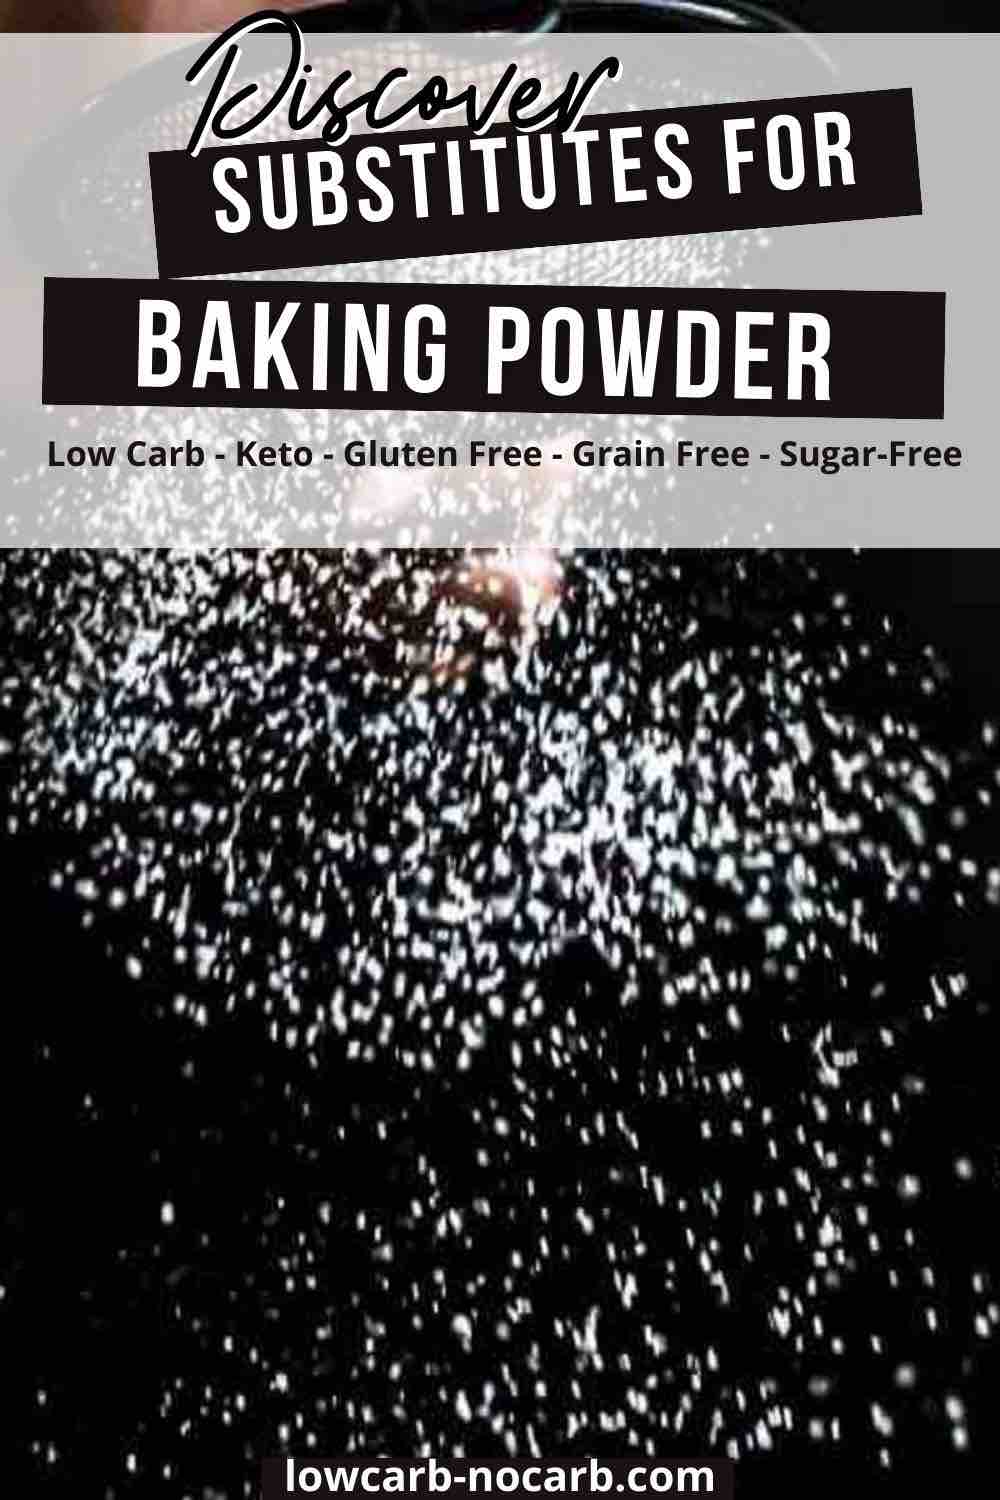 Discover substitutes for baking powder.